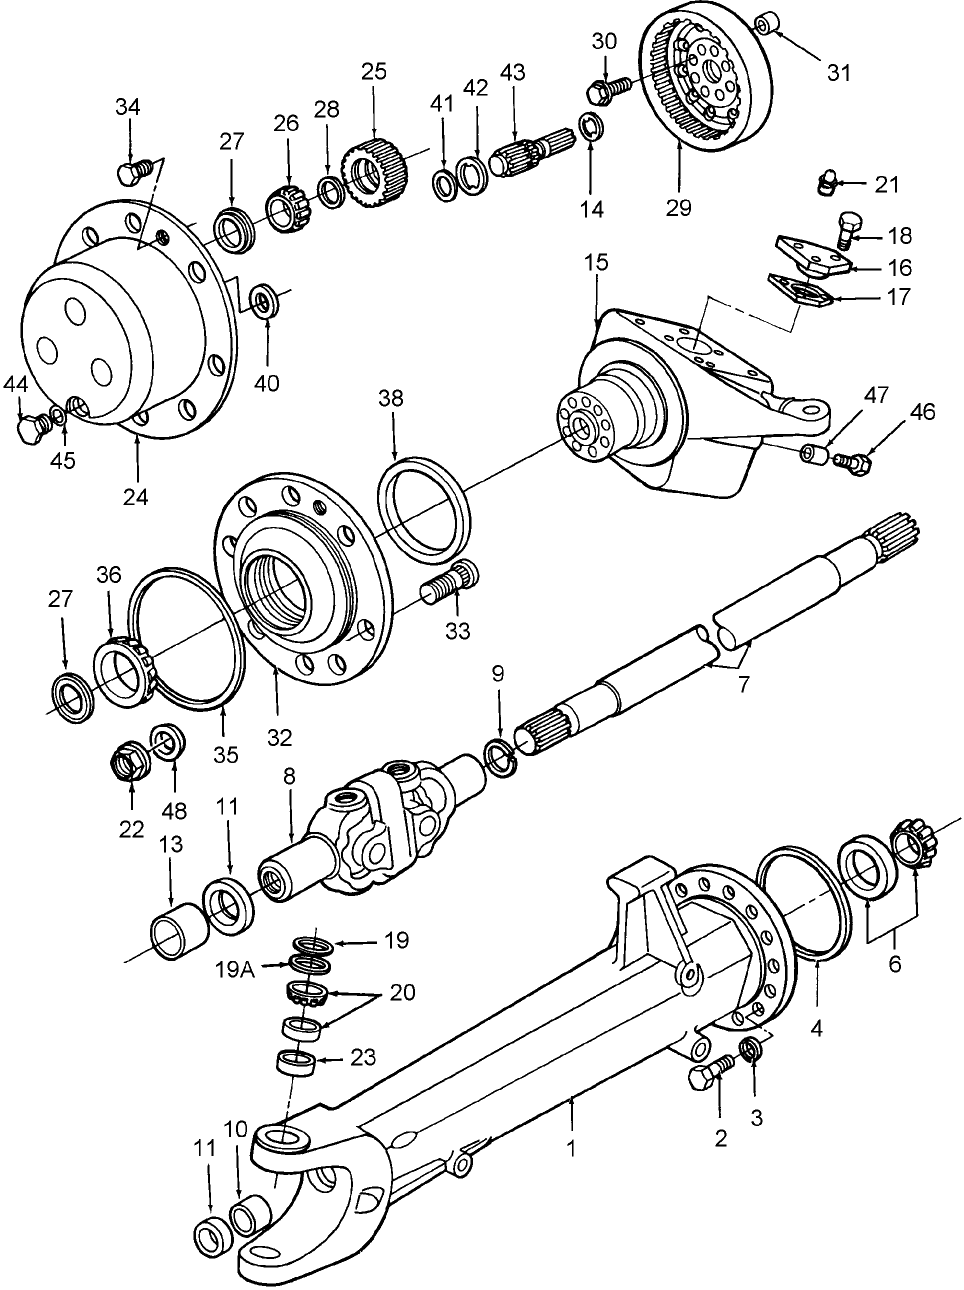 03H02 FRONT AXLE, HUB, SPINDLE & PLANET CARRIER (81/4-84) - 5610, 6610, 6610O, 6710, 7610, 7710